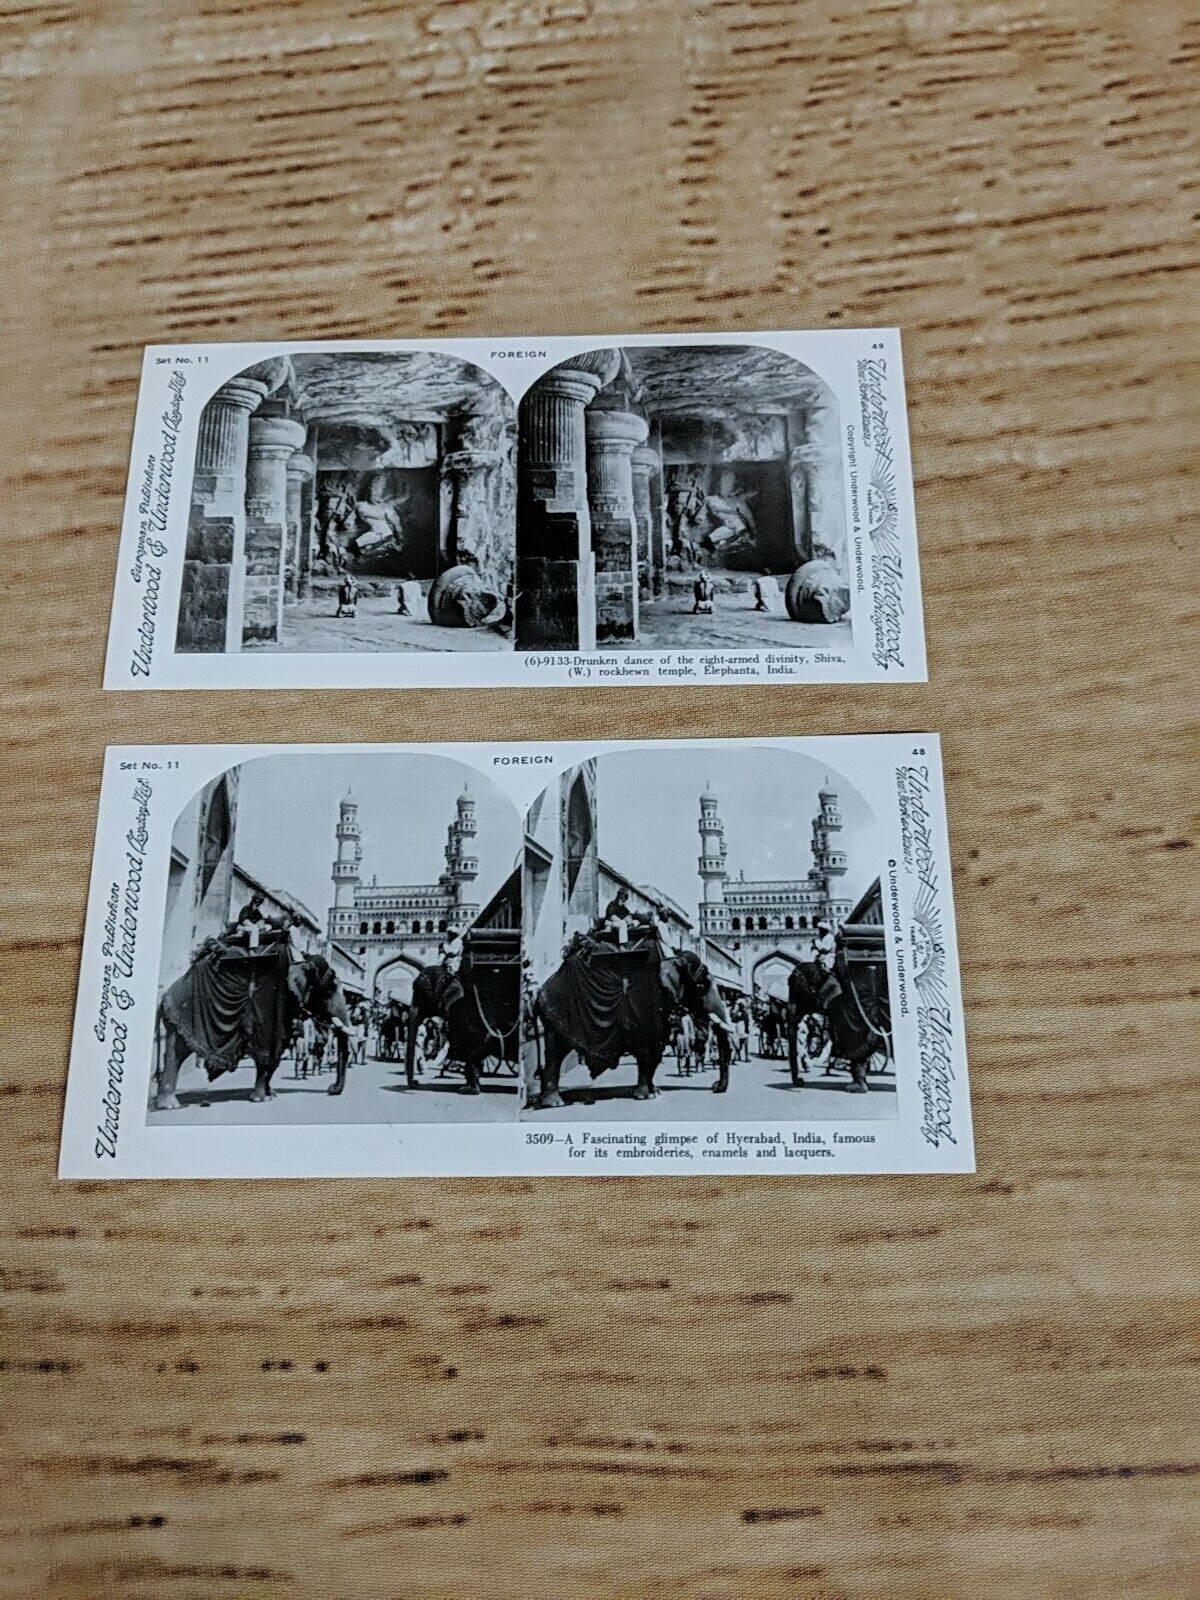 Elephants and Charminar, Hyderabad, India, 1978 Reproduction of c1910 Stereoview